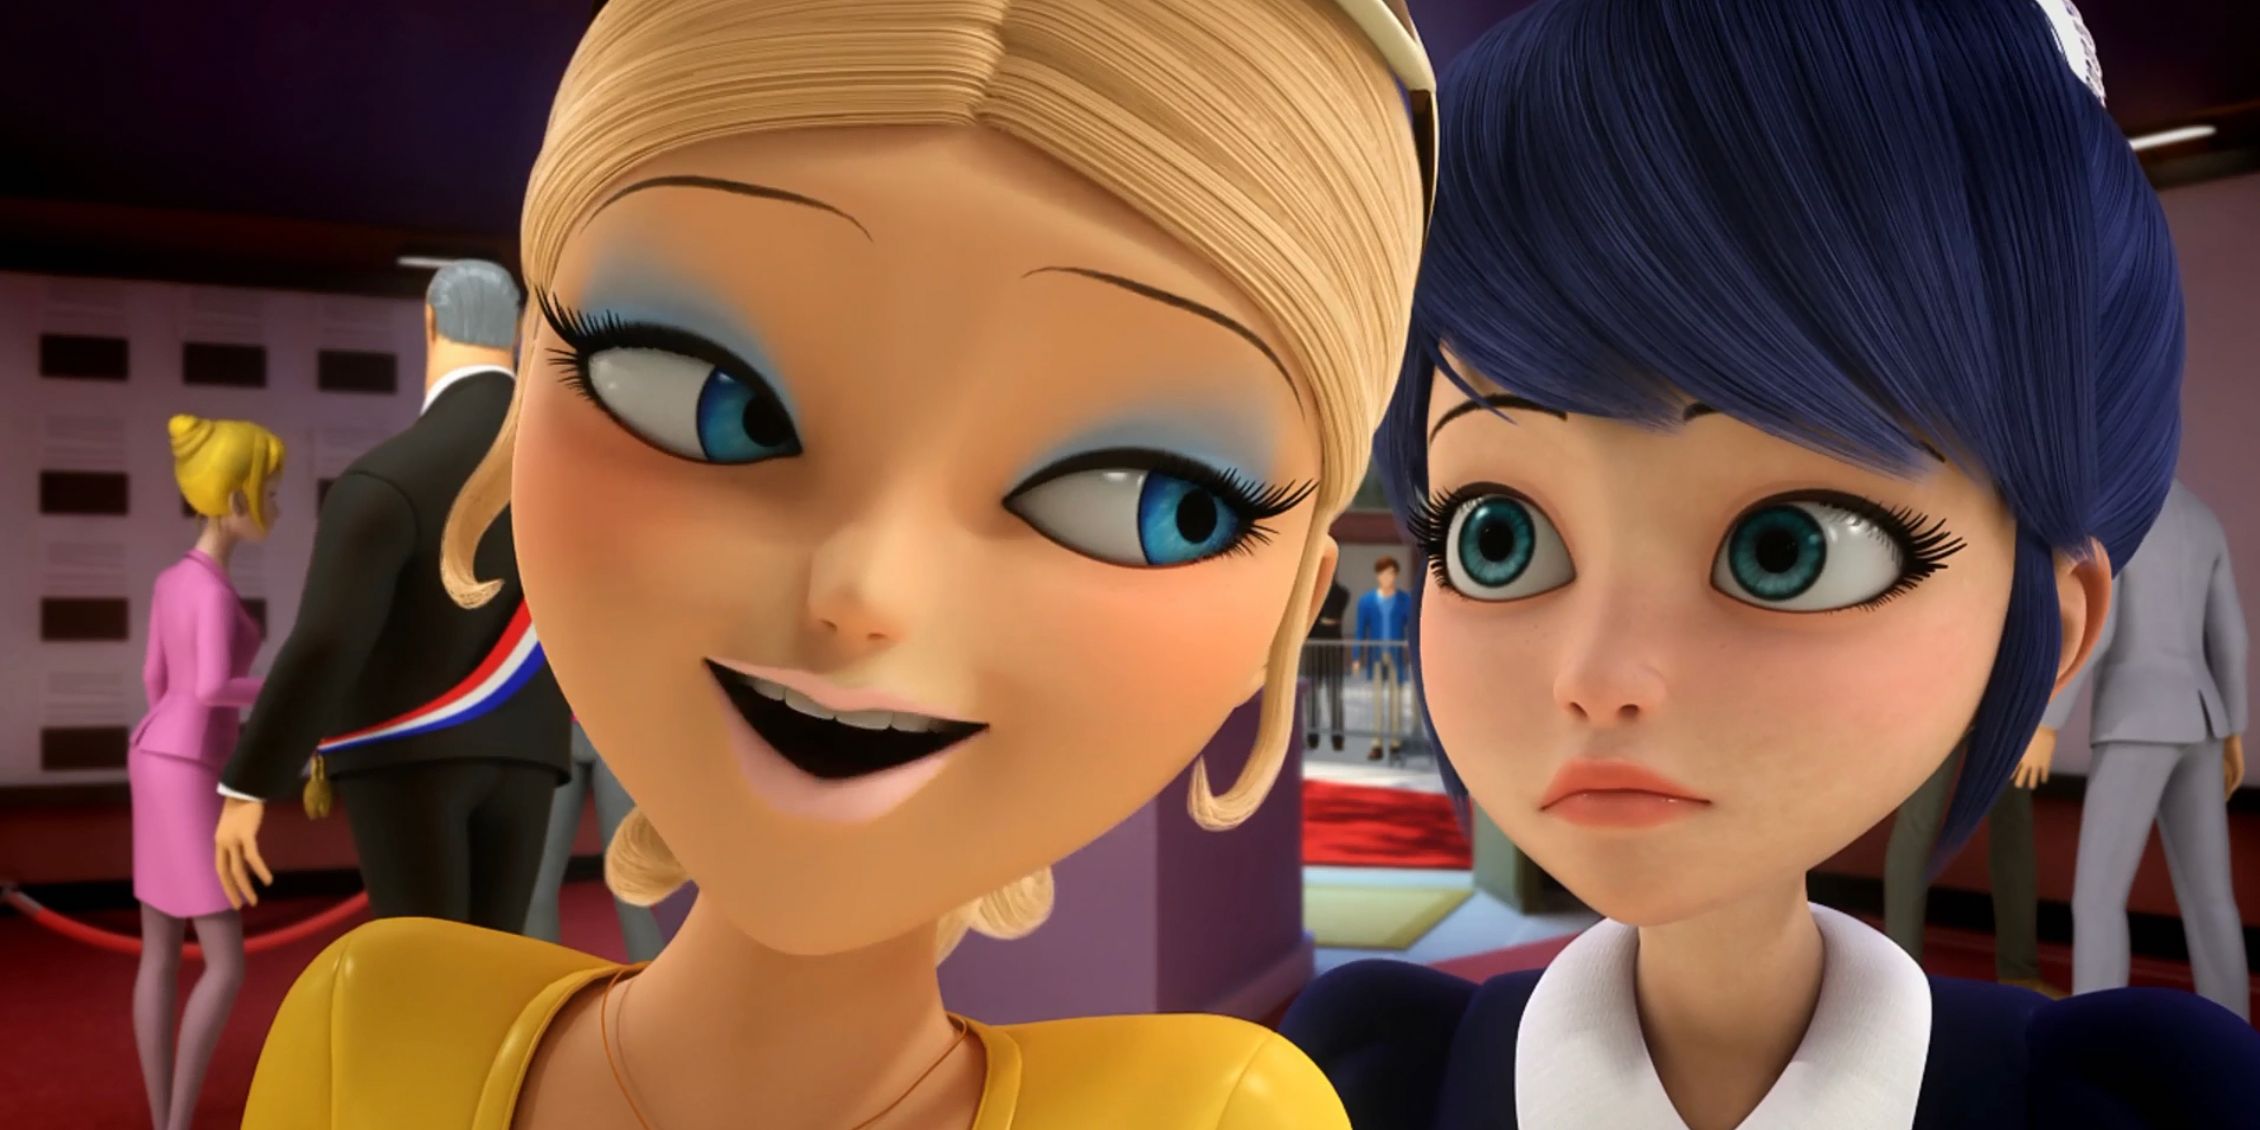 Chloe and Marinette team up in Miraculous Ladybug